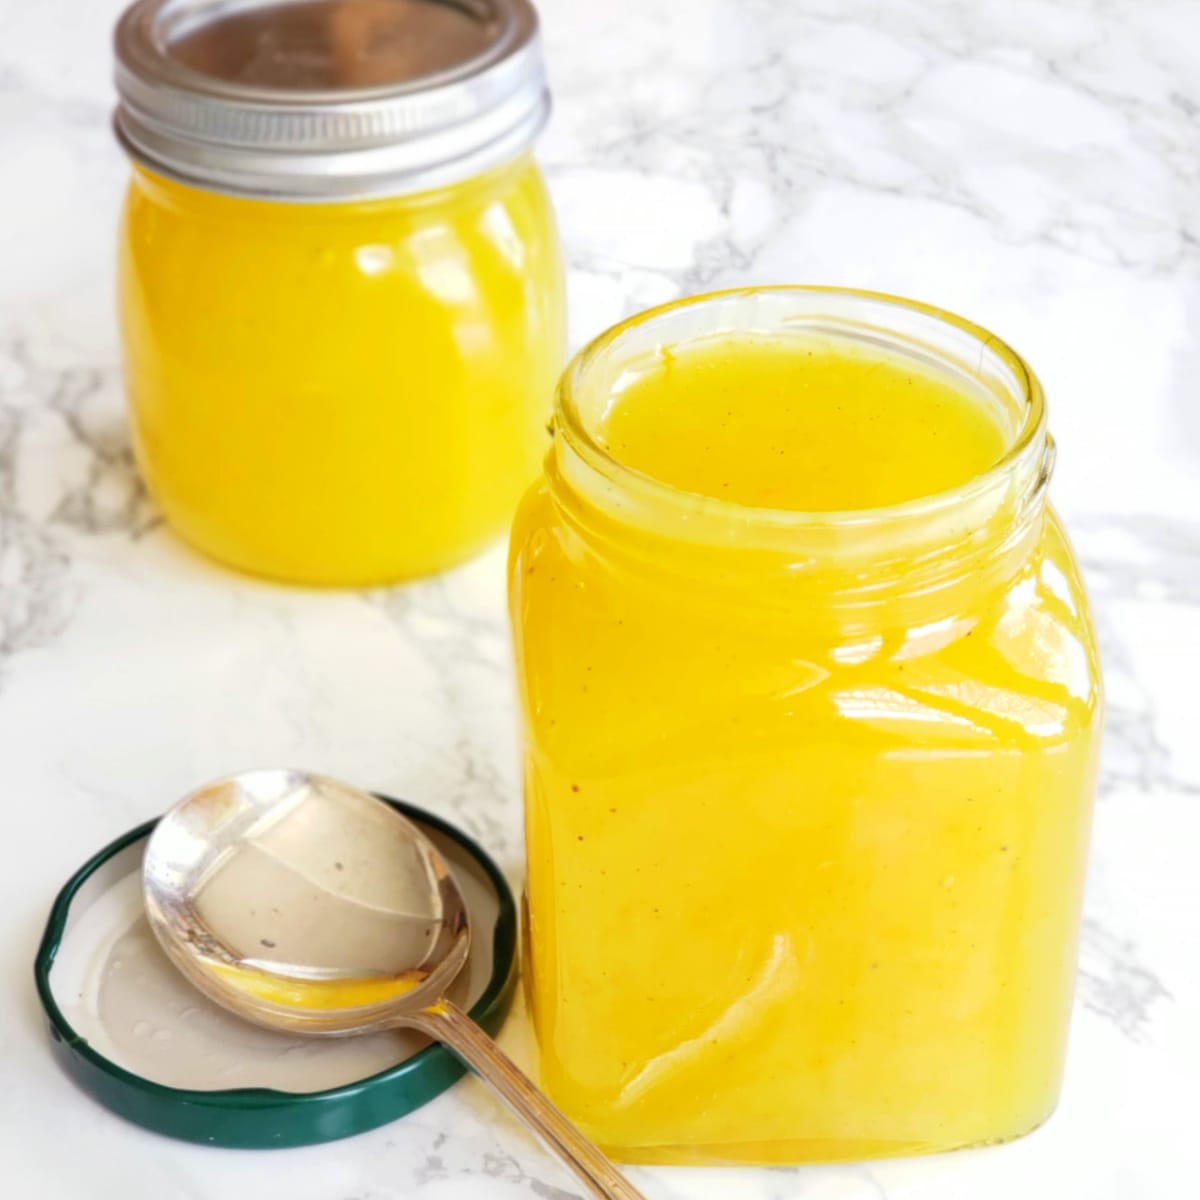 2 jars of lemon filling on a white marble counter. The jar in the foreground has its lid off and spoon resting in the lid